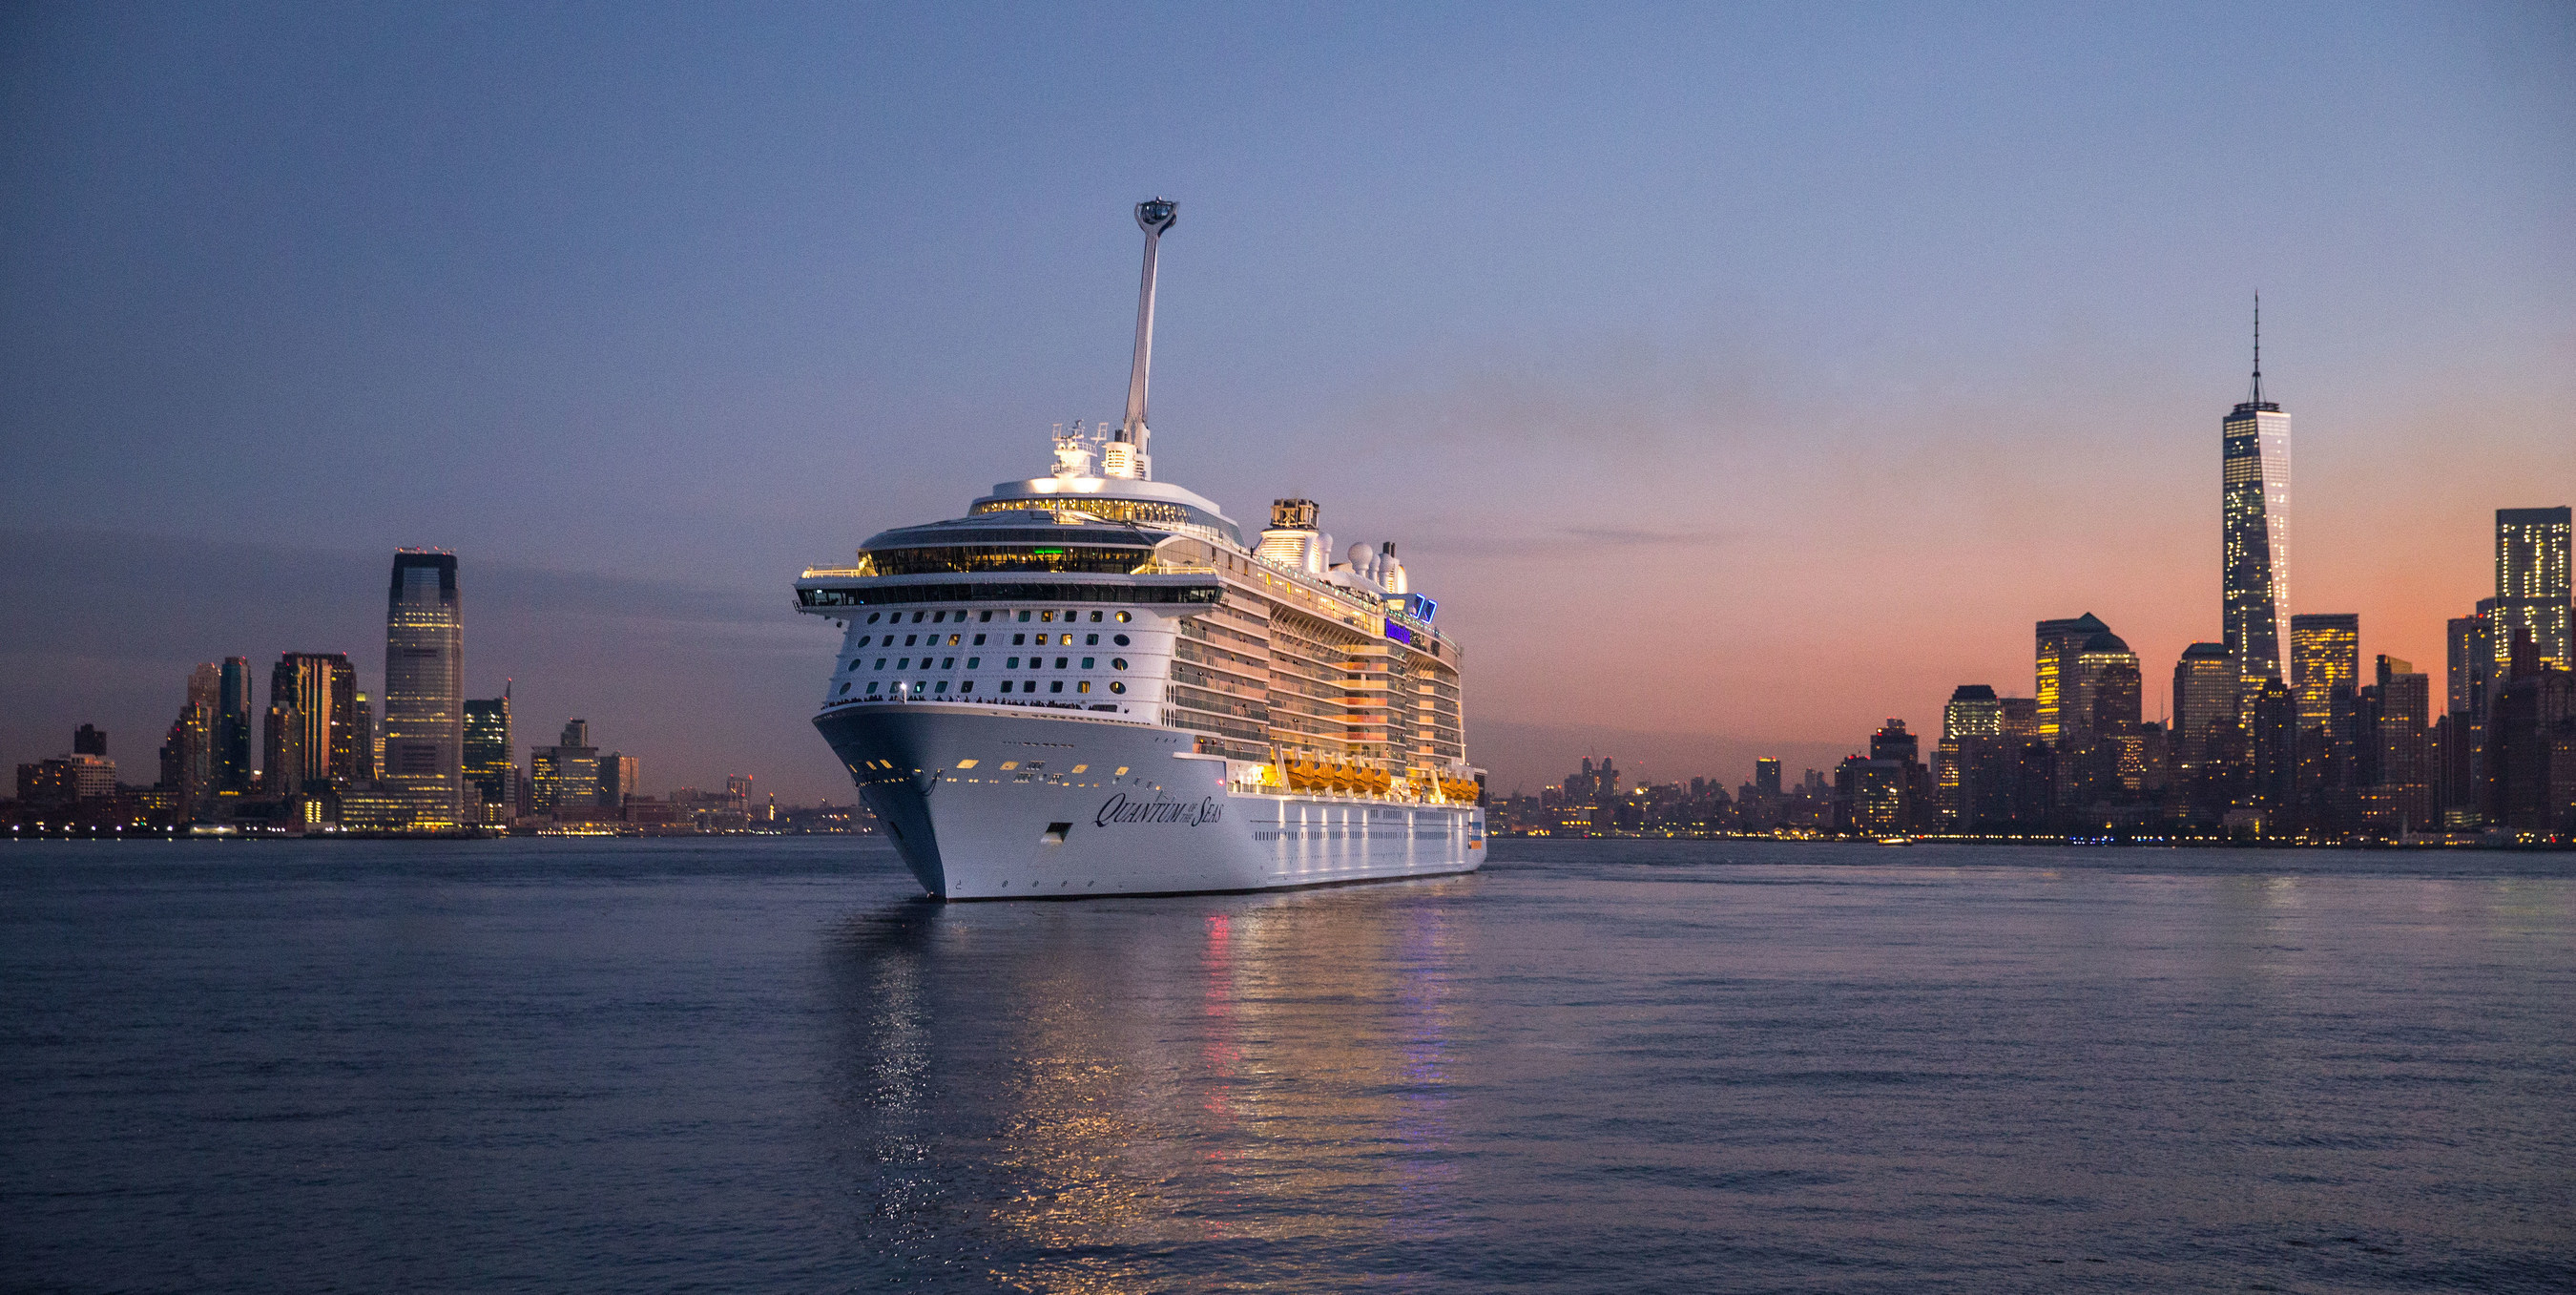 The world's first smartship, Quantum of the Seas, sails into New York Harbor.